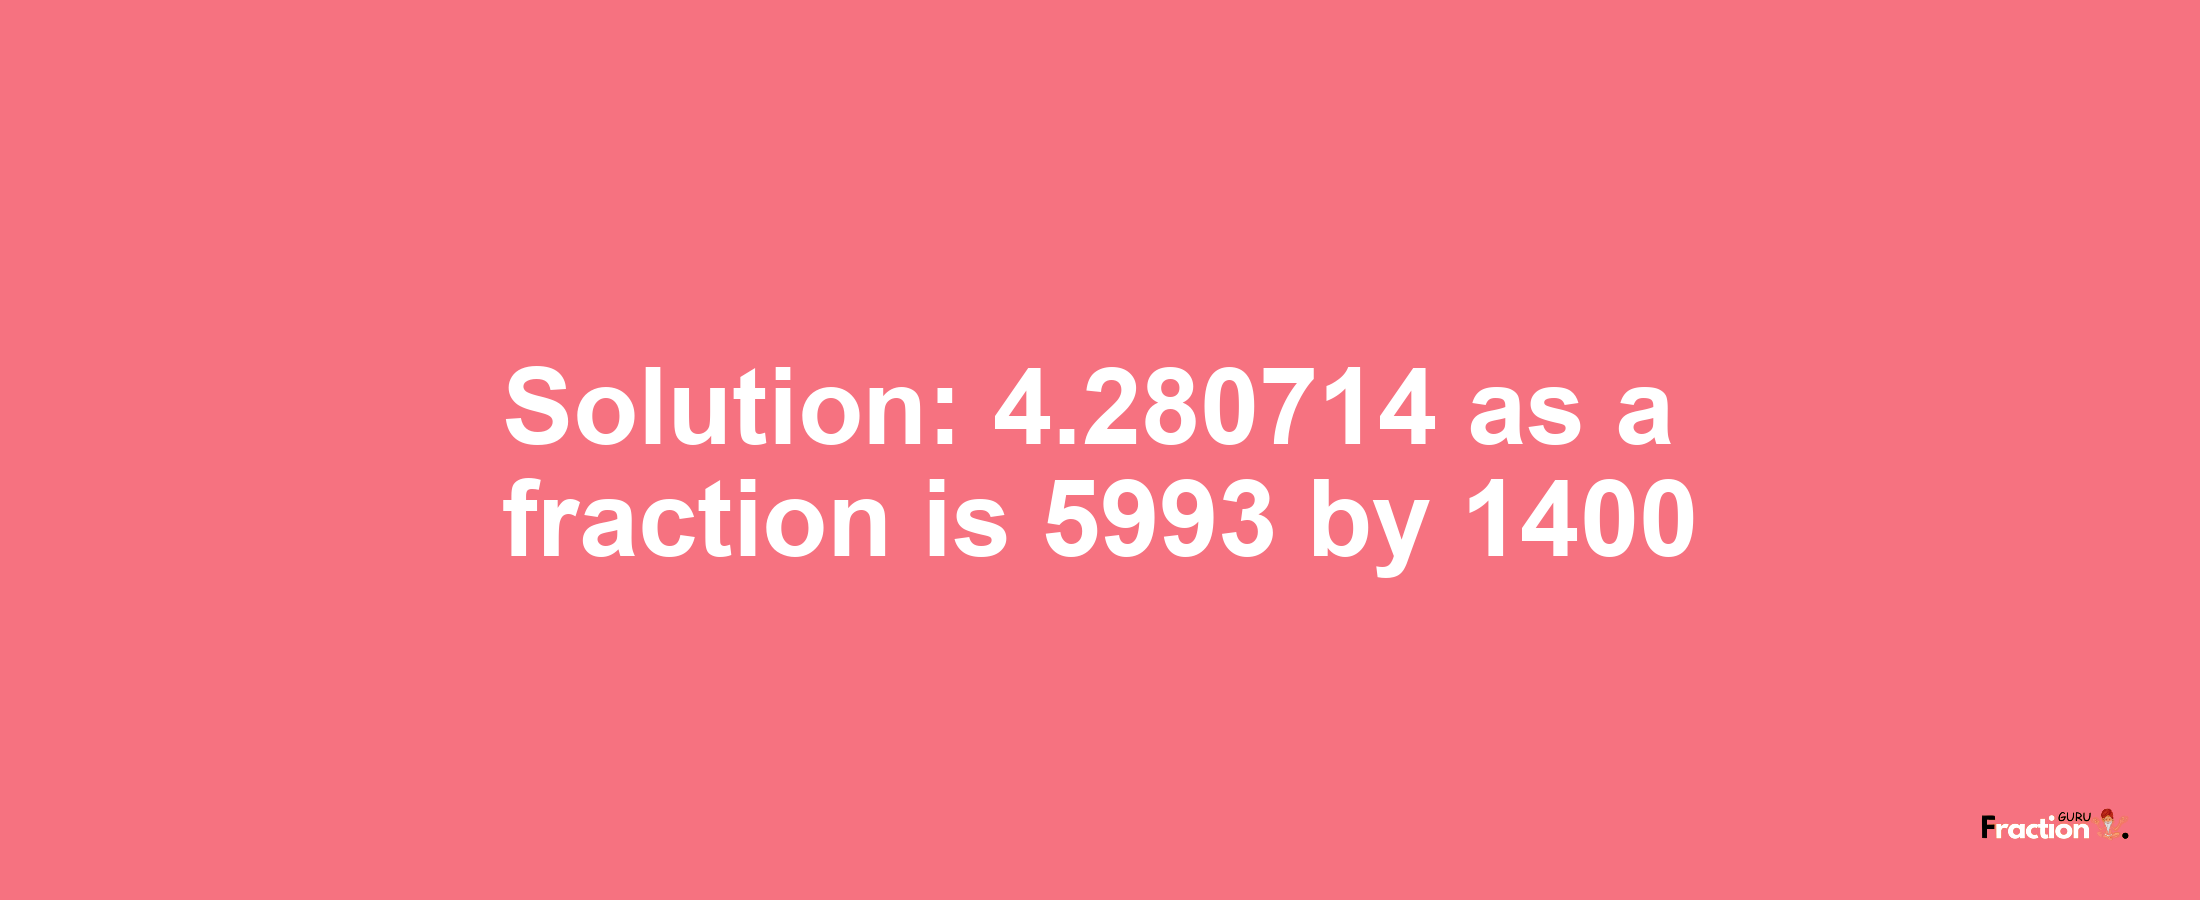 Solution:4.280714 as a fraction is 5993/1400